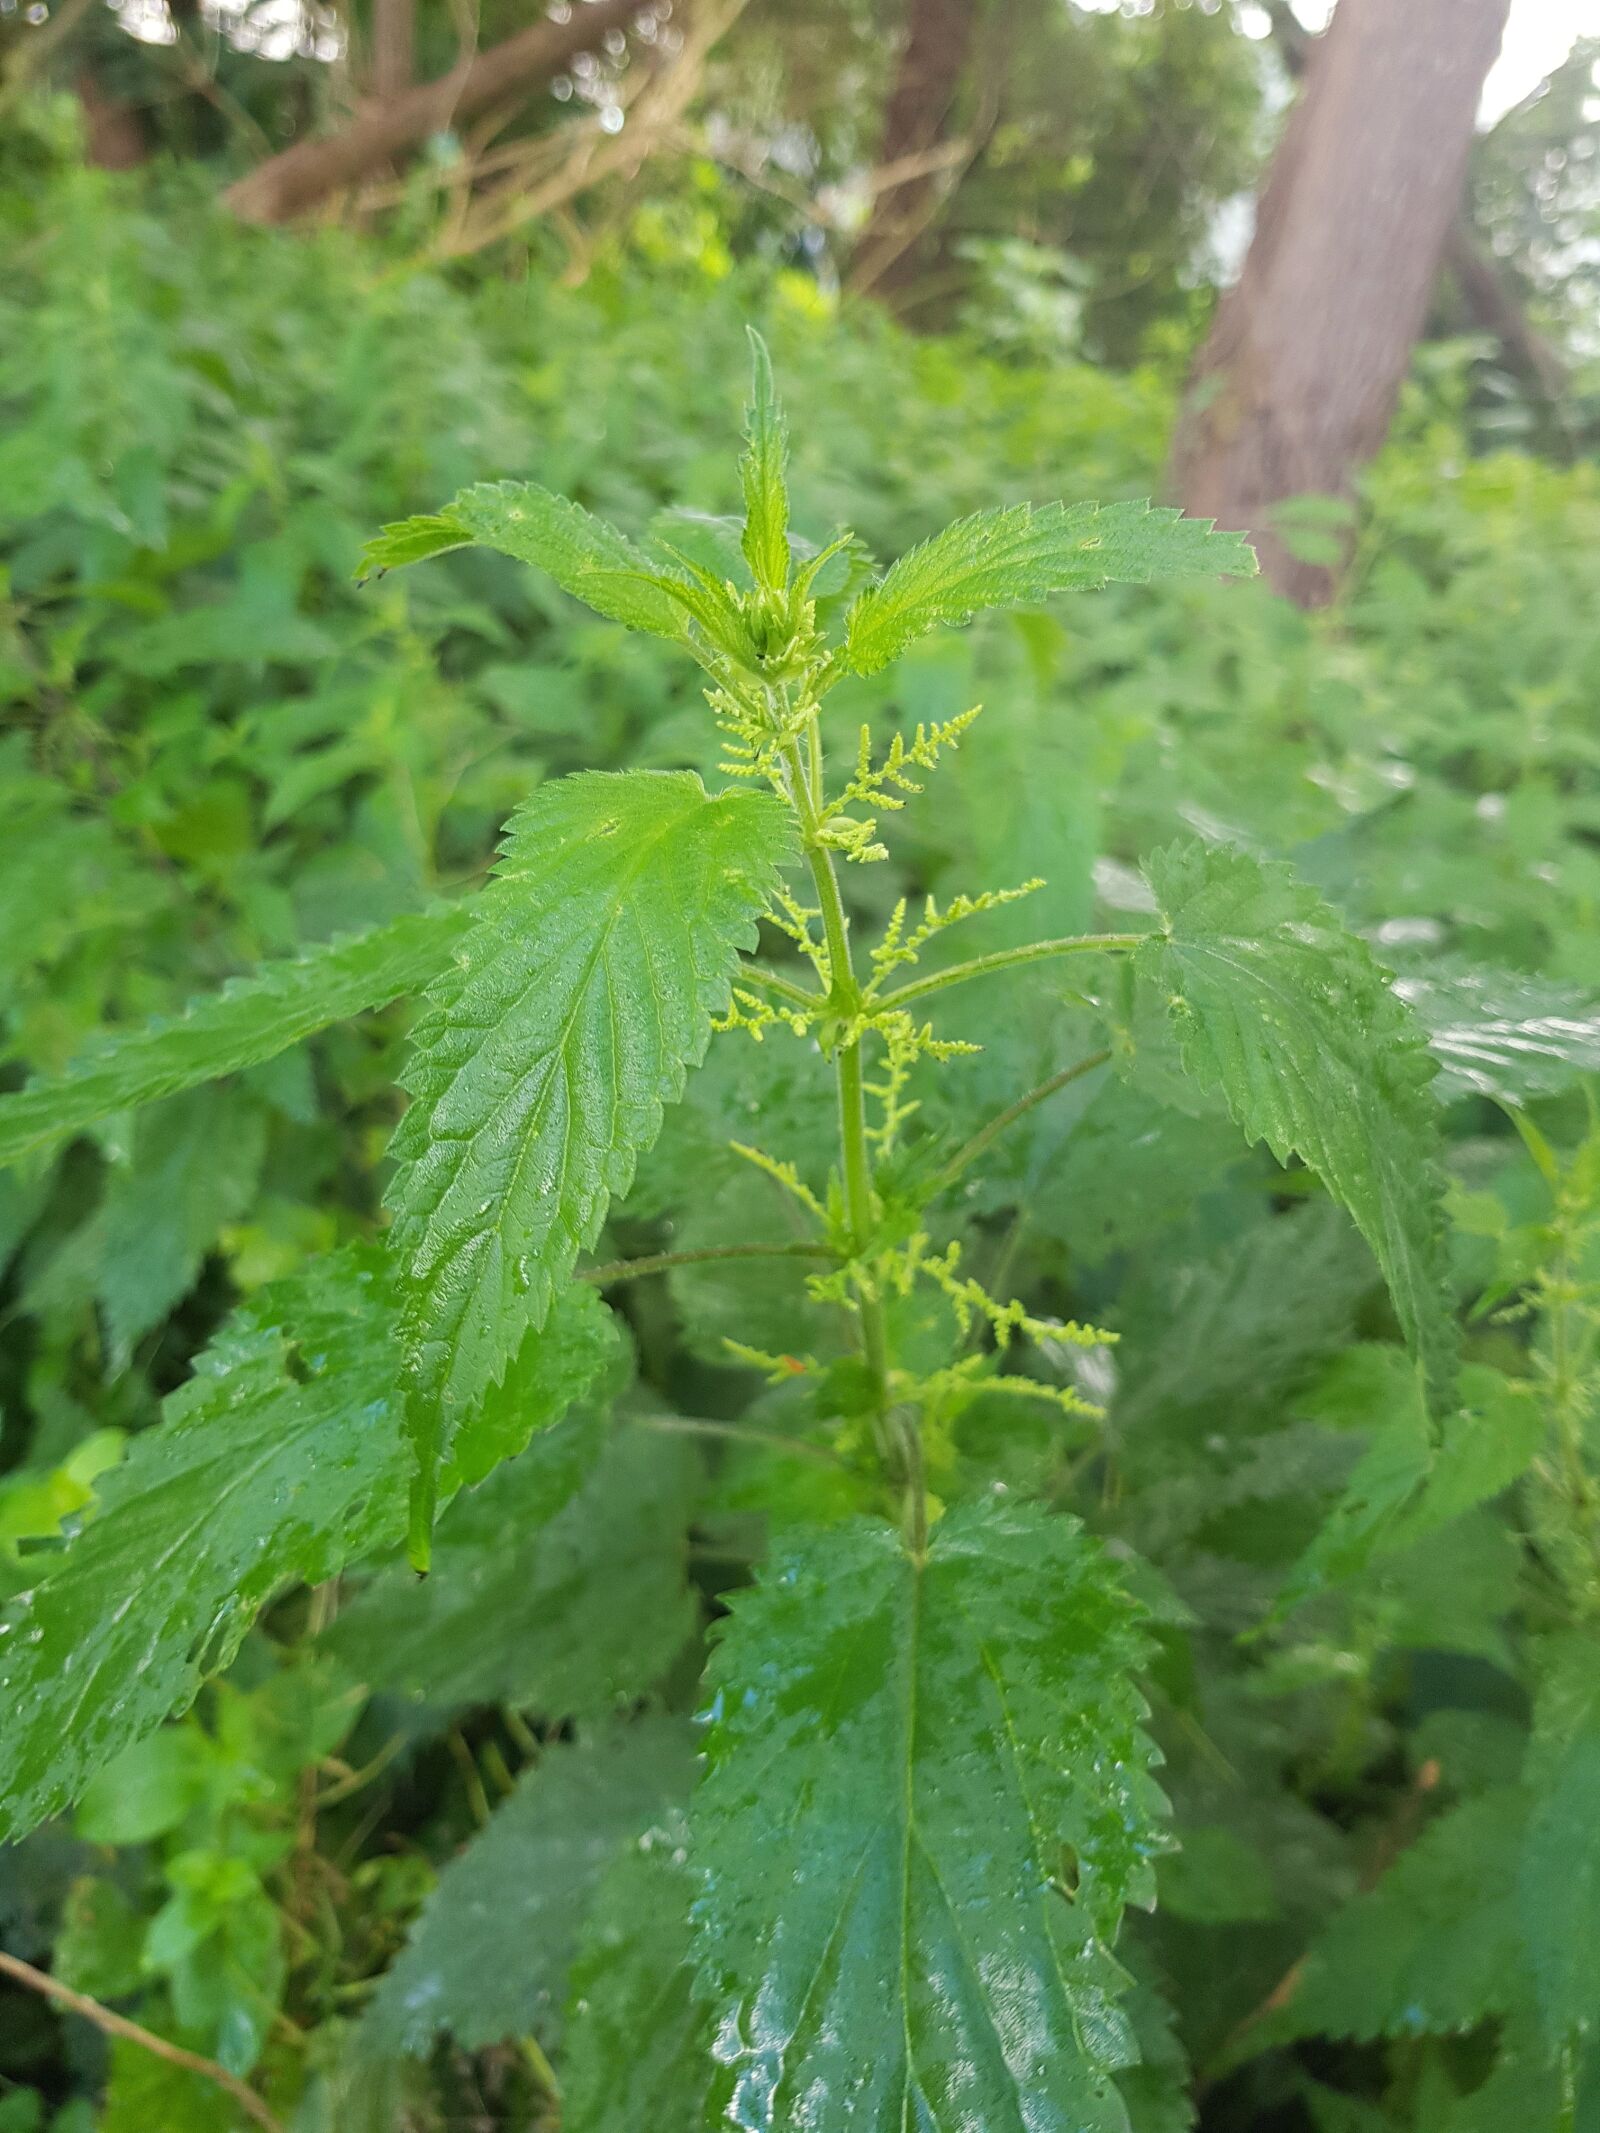 Samsung Galaxy S8 sample photo. Brennessel, nature, medicinal plant photography